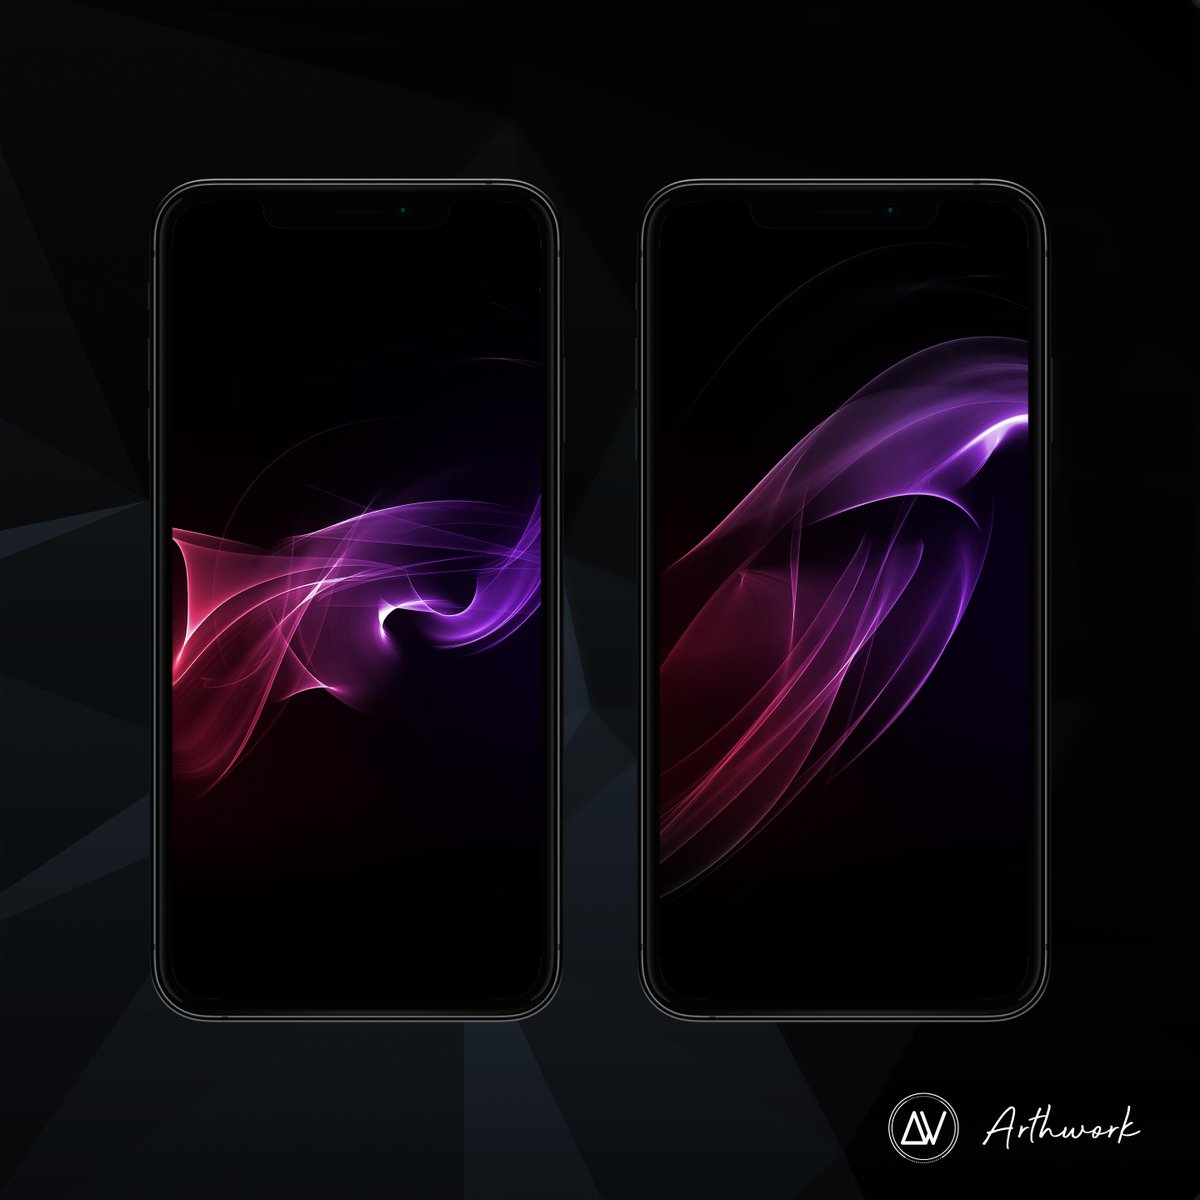 Top 97+ Images ne xs max amoled wallpapers Latest